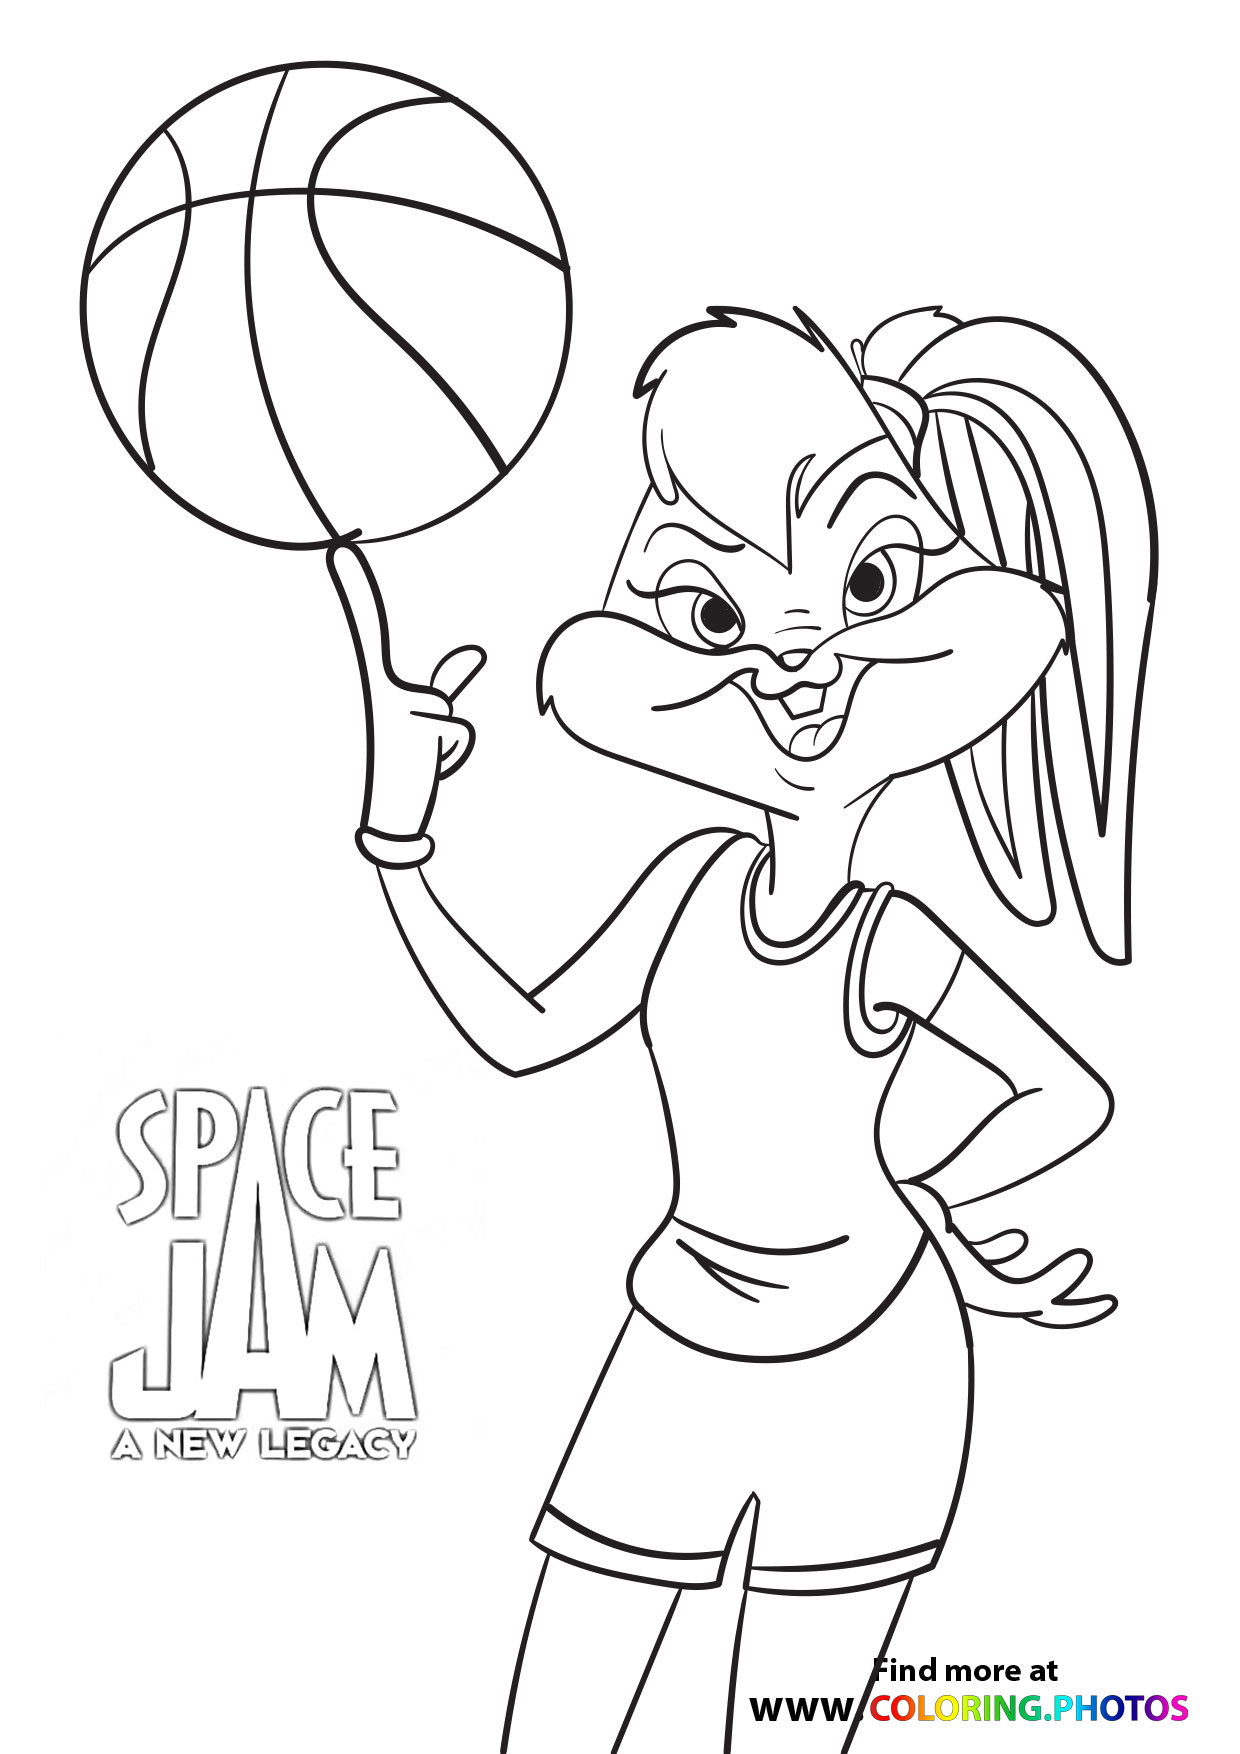 Lola - Space Jam: A new legacy - Coloring Pages for kids